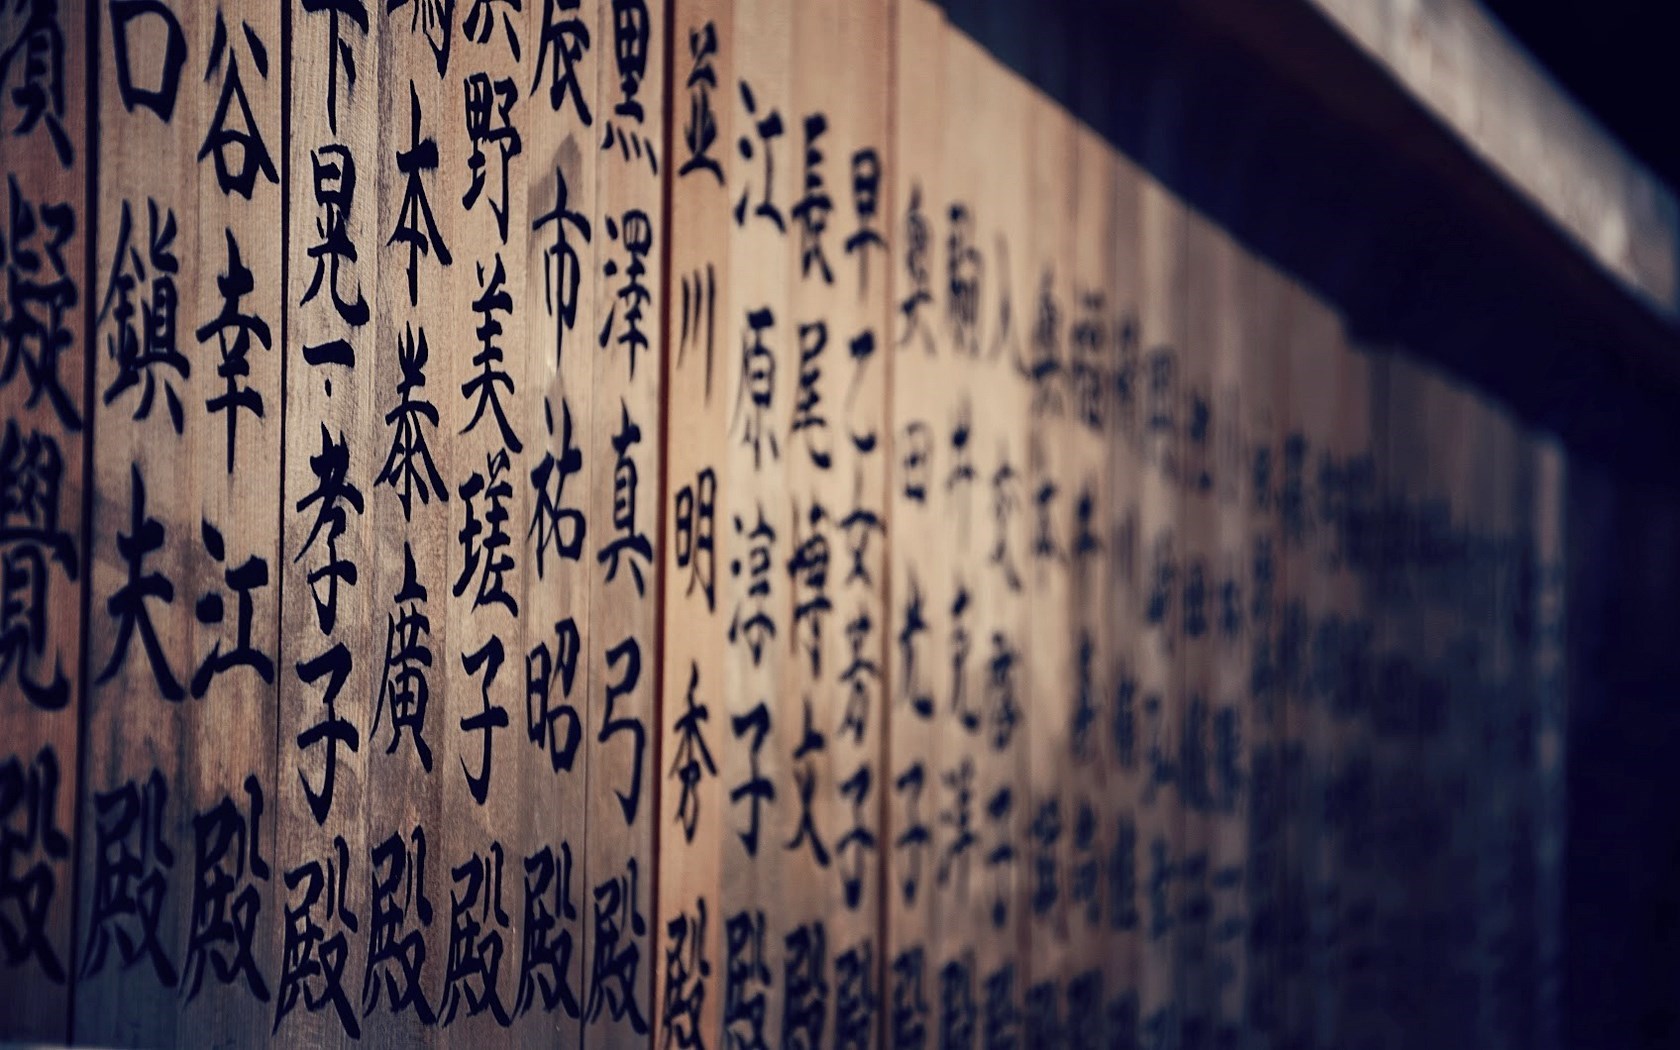 japanese writing wallpaper,wall,text,font,sky,architecture